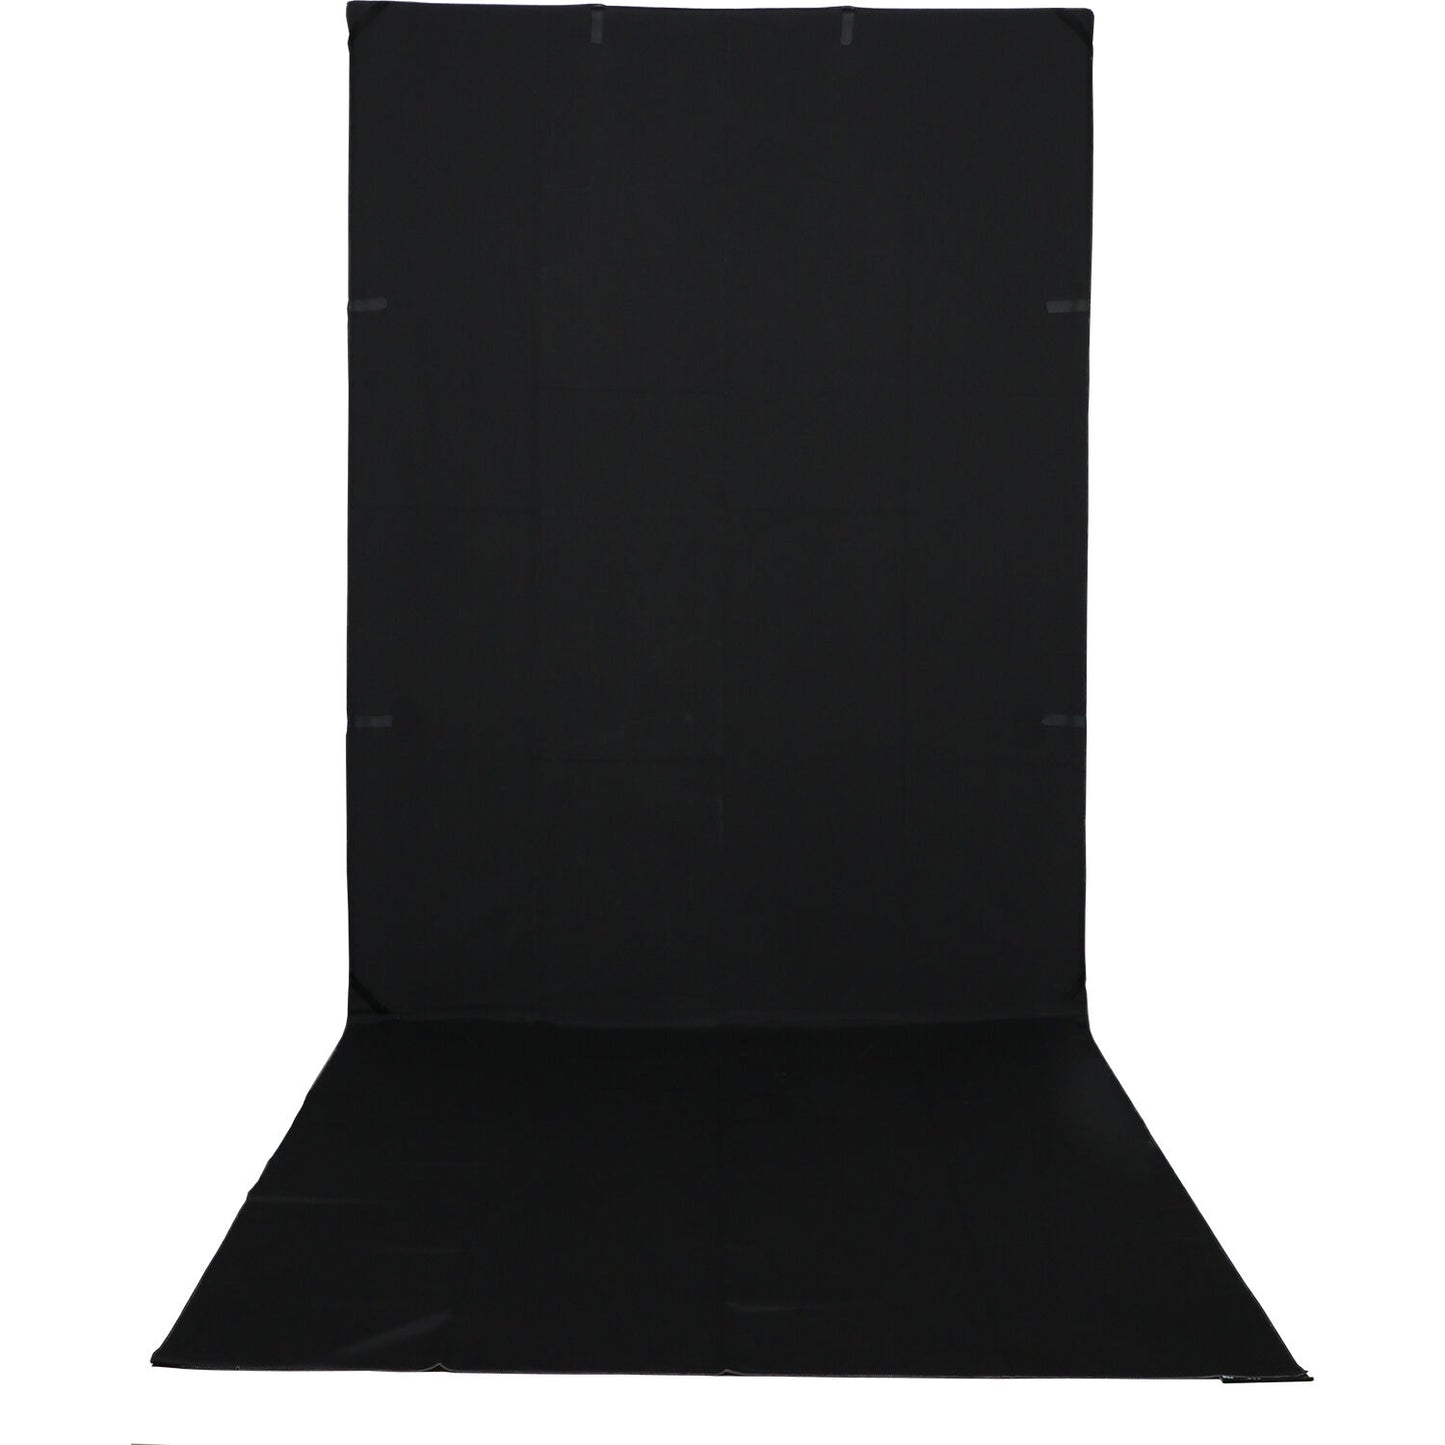 Phottix Q-drop Collapsible Backdrop Kit 5ft by 13ft with 4 Colors Green / Blue and Black / White Cotton Muslin Background PH83432